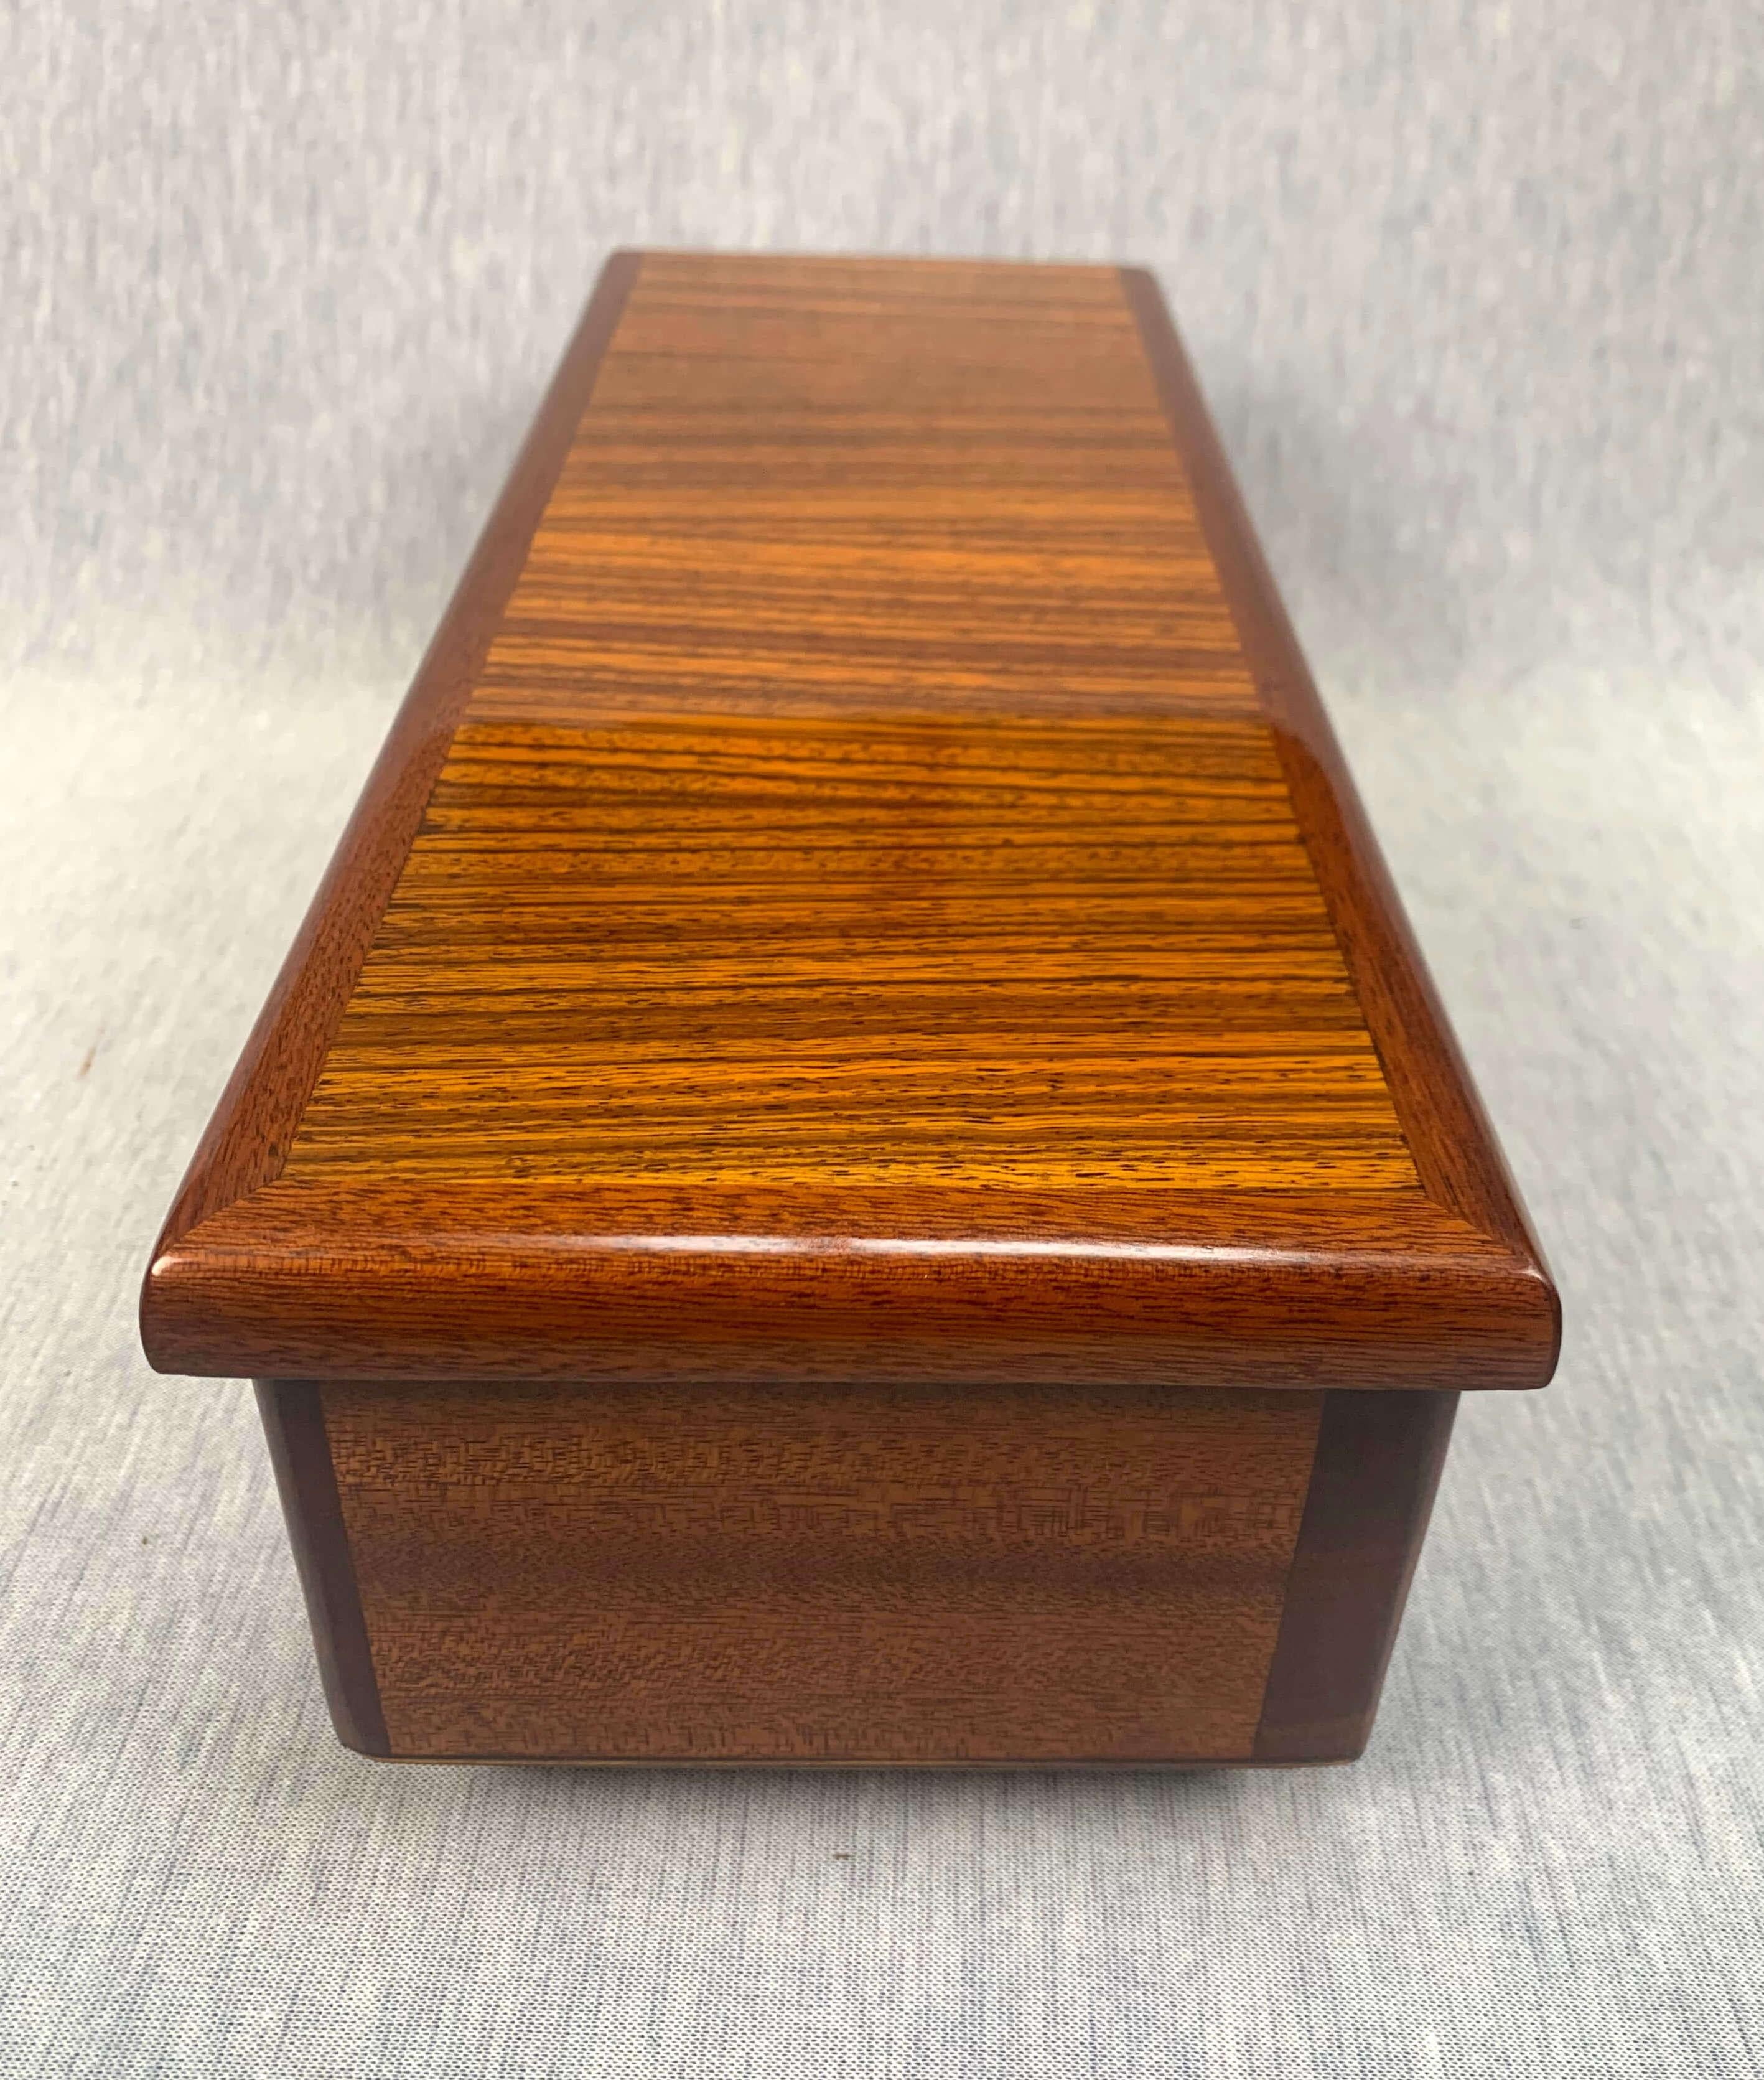 Art Deco game box, rosewood and walnut, France, circa 1930

Long Art Deco game box made of rosewood and walnut.
Inside three compartments for games and green felt.

Dimensions: H 11.5, W 39.5, D 15 cm.